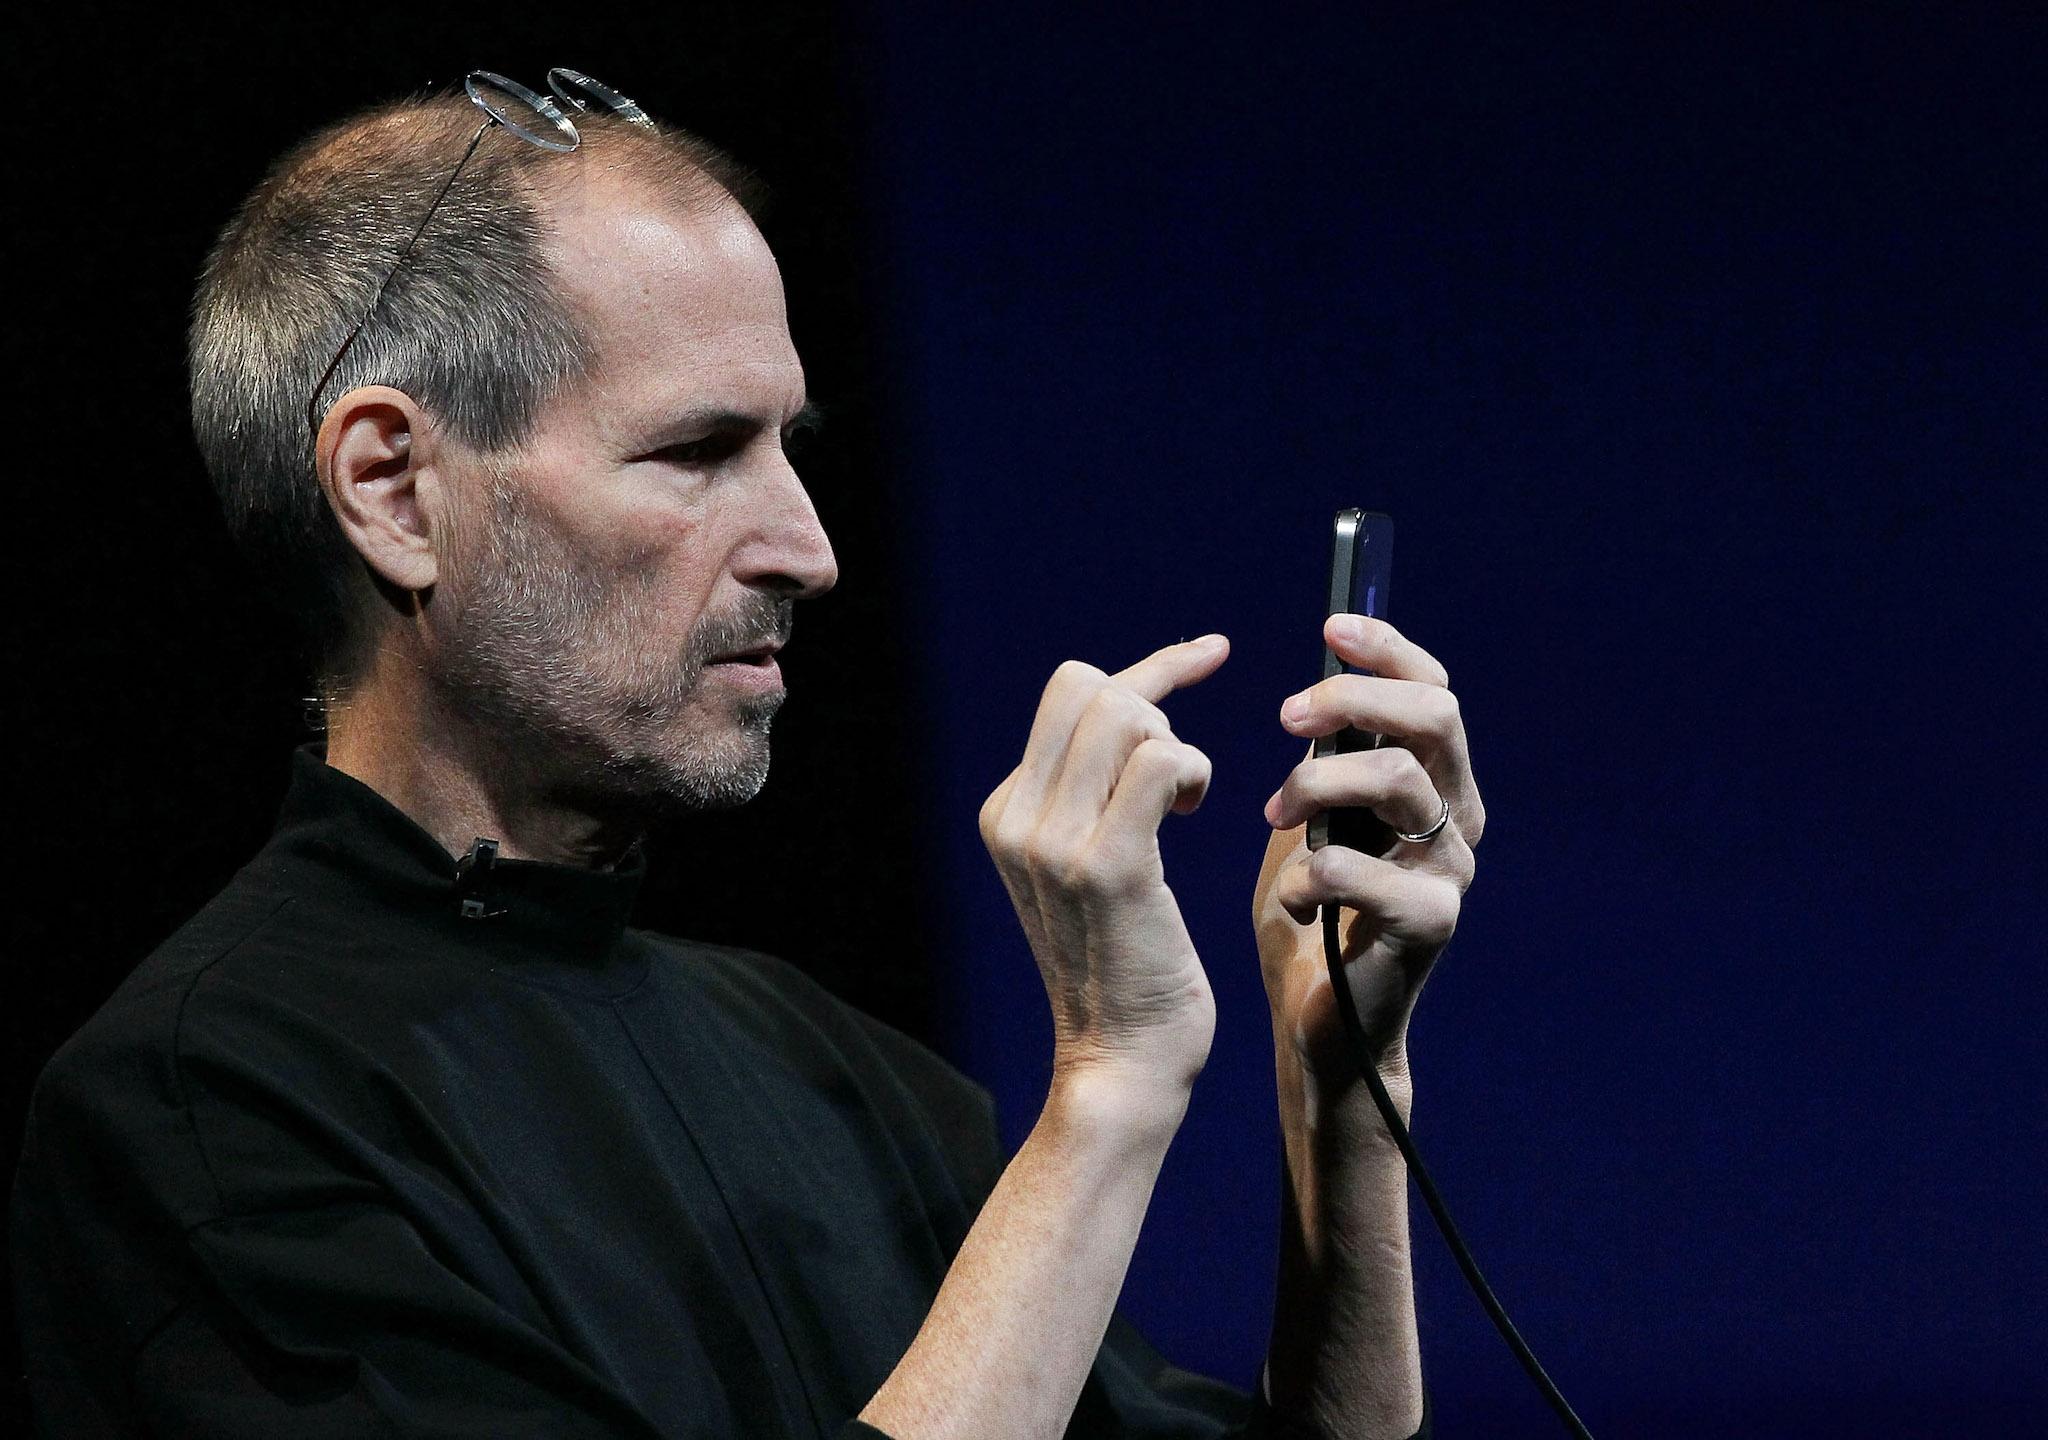 Apple CEO Steve Jobs demonstrates the new iPhone 4 as he delivers the opening keynote address at the 2010 Apple World Wide Developers conference June 7, 2010 in San Francisco, California